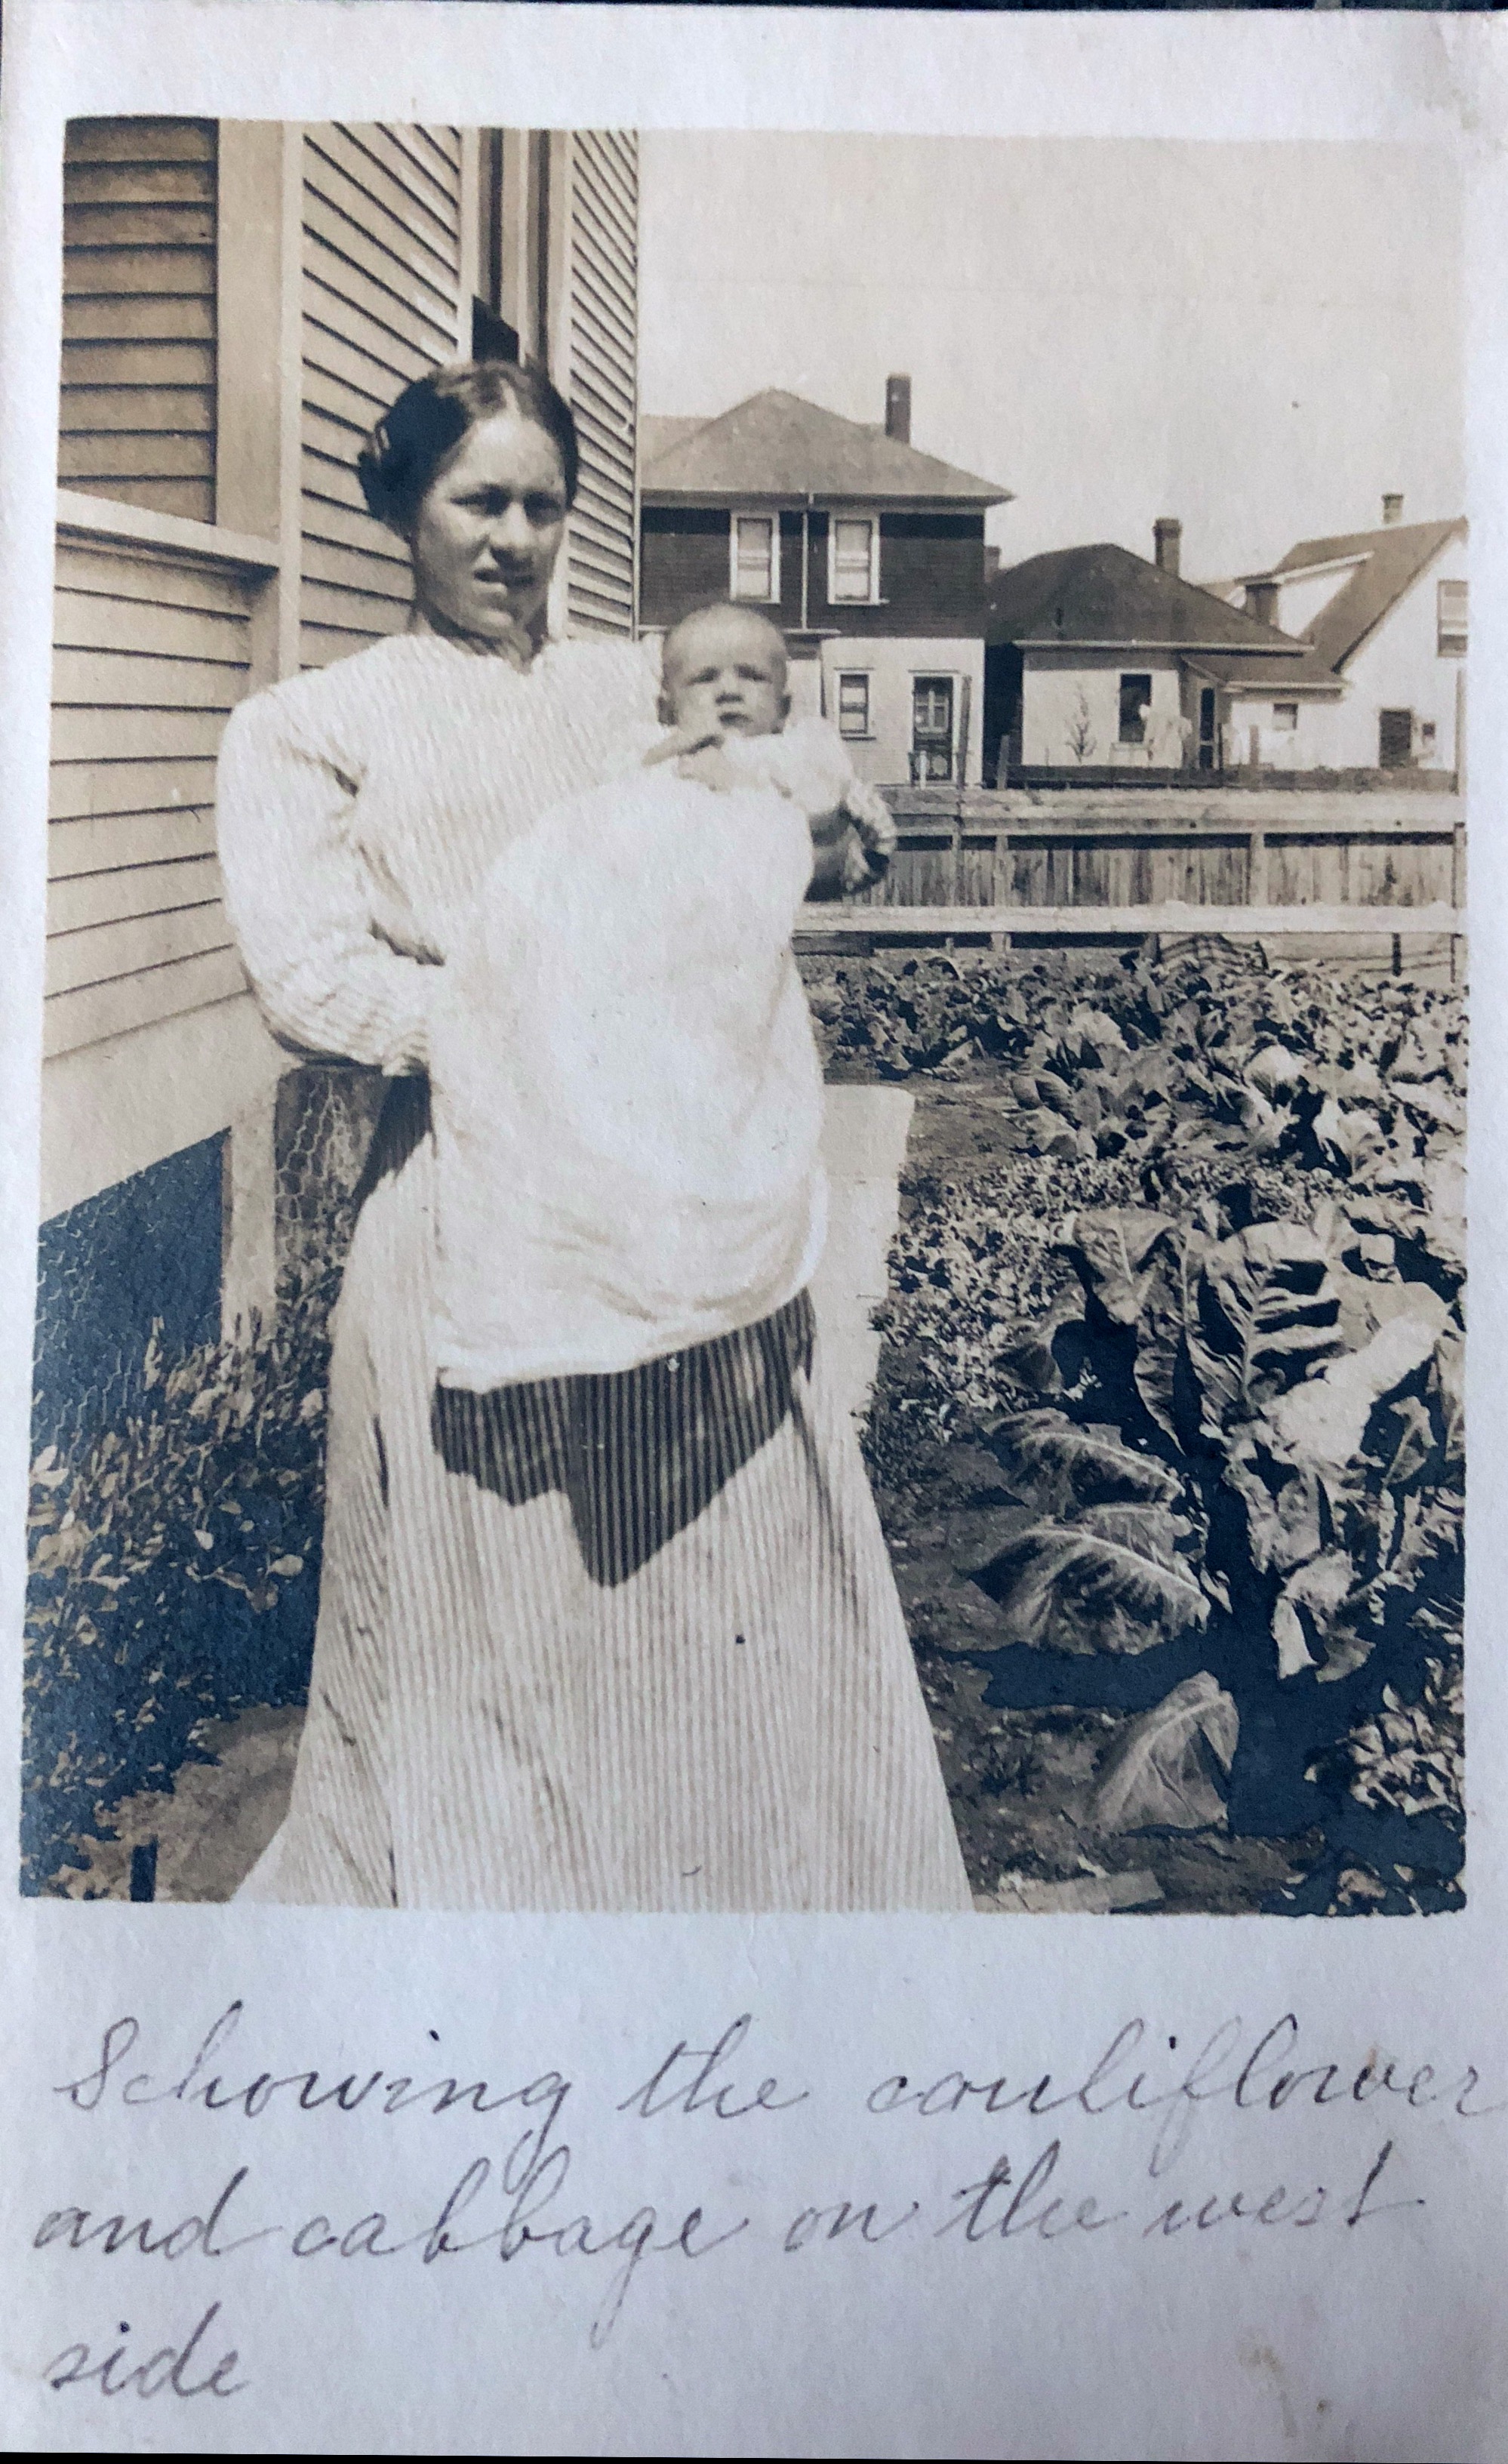 My great grandmother Louise Emile Toebe Wendt with my grandfather as Robert Toebe Wendt as an infant.  Circa Summer, 1913.  Outside of their home in Calgary, AB, Canada